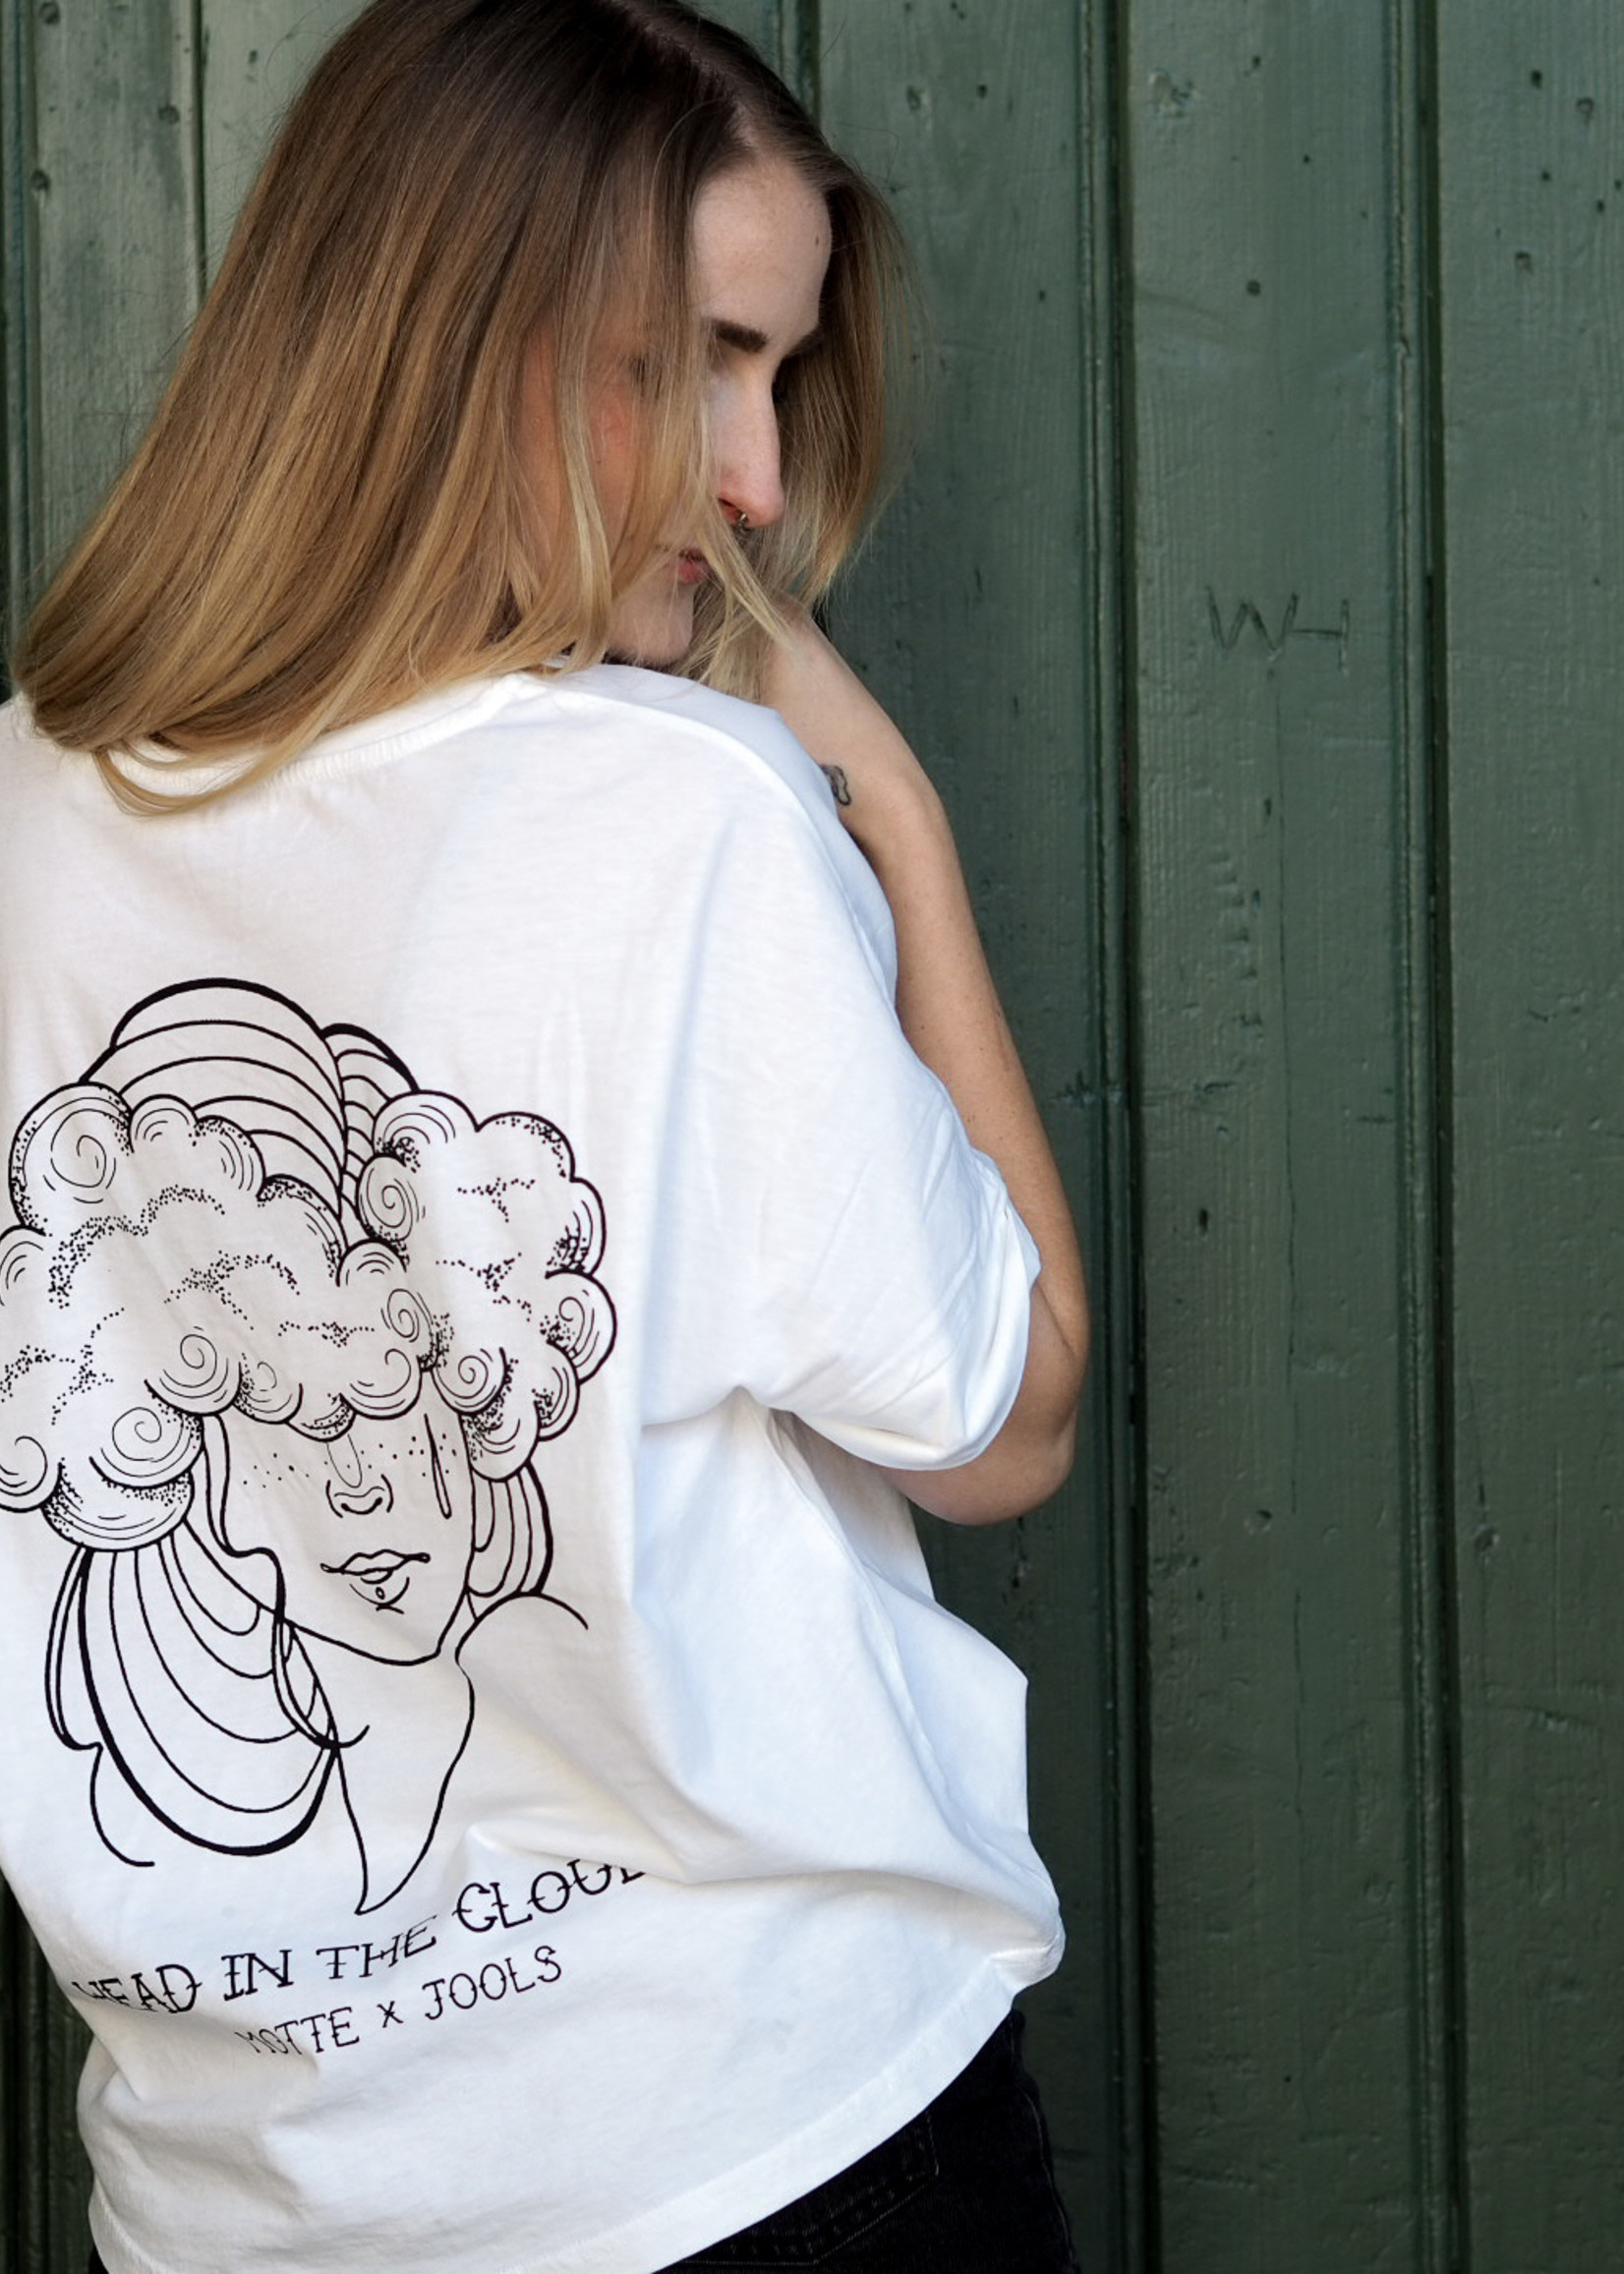 Head in the Clouds - Shirt oversize white